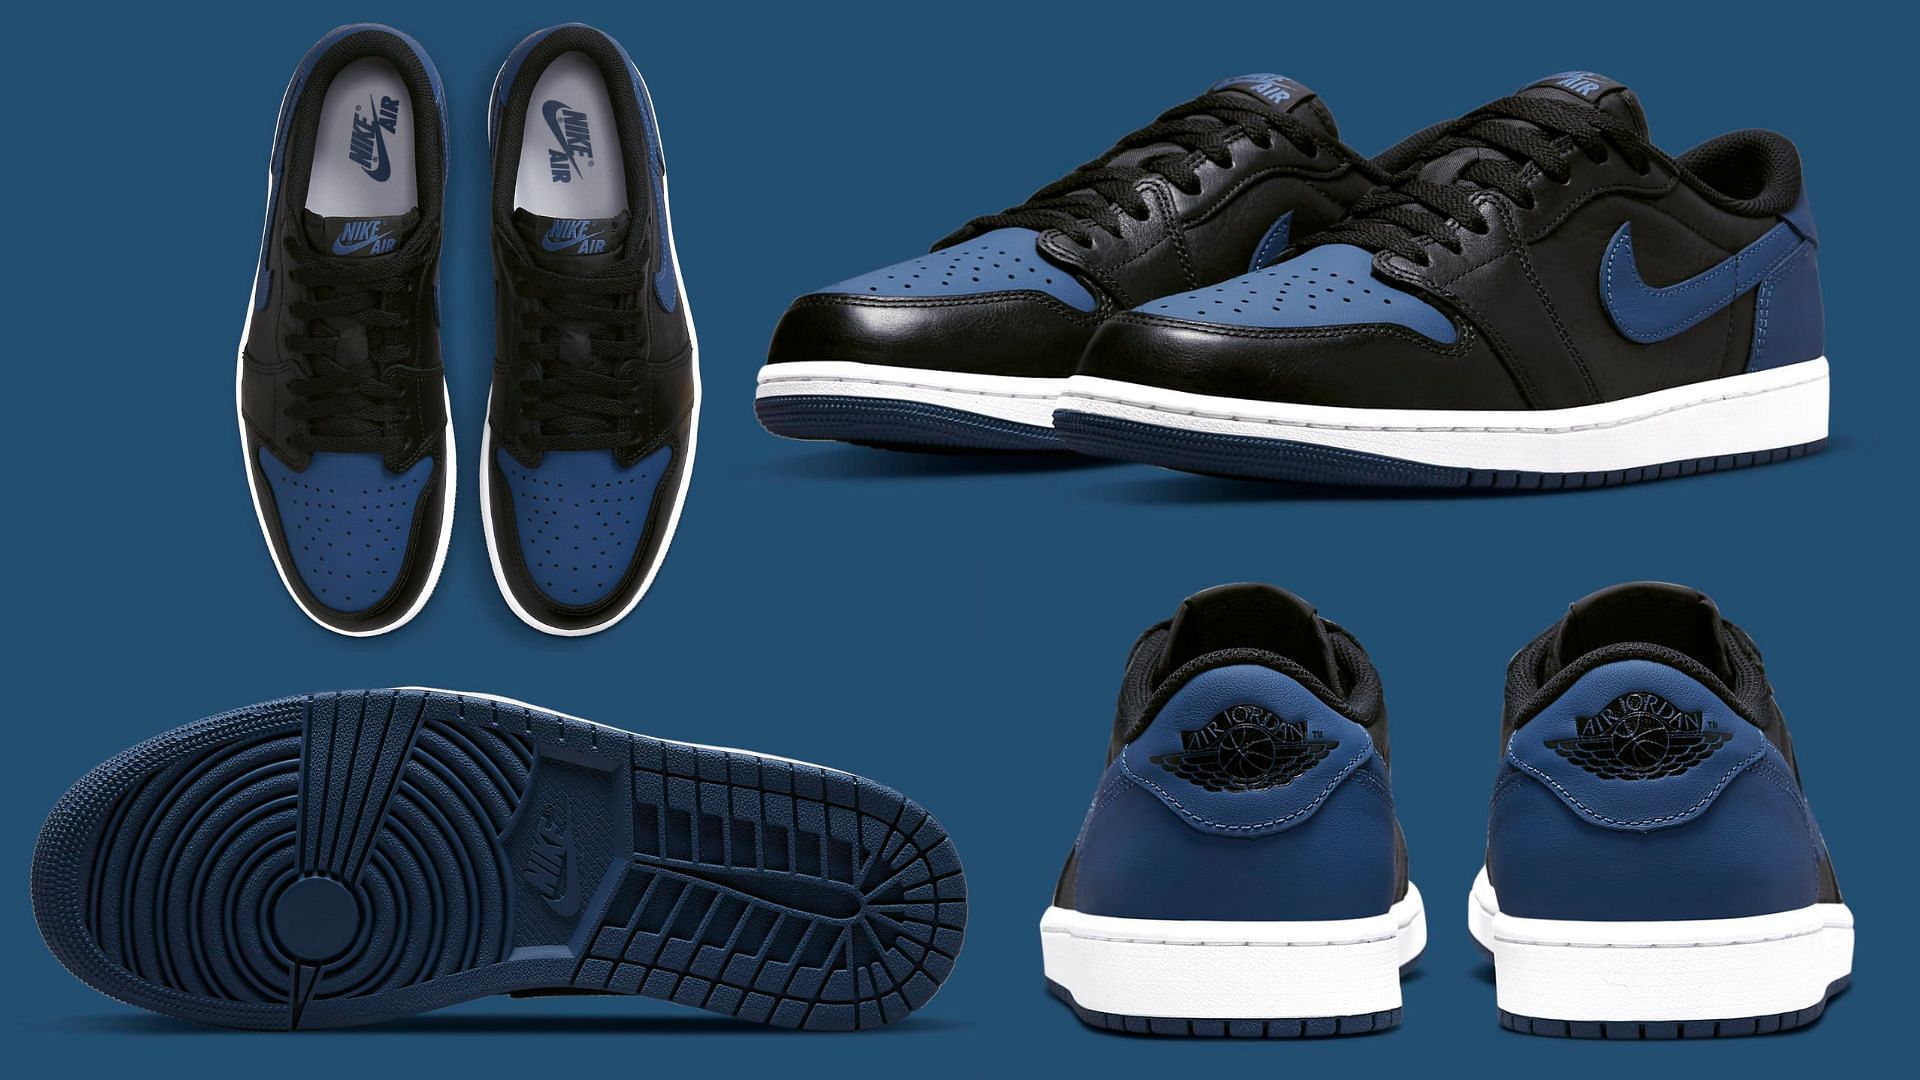 Where to buy Air Jordan 1 Low Mystic Navy shoes? Release date, price